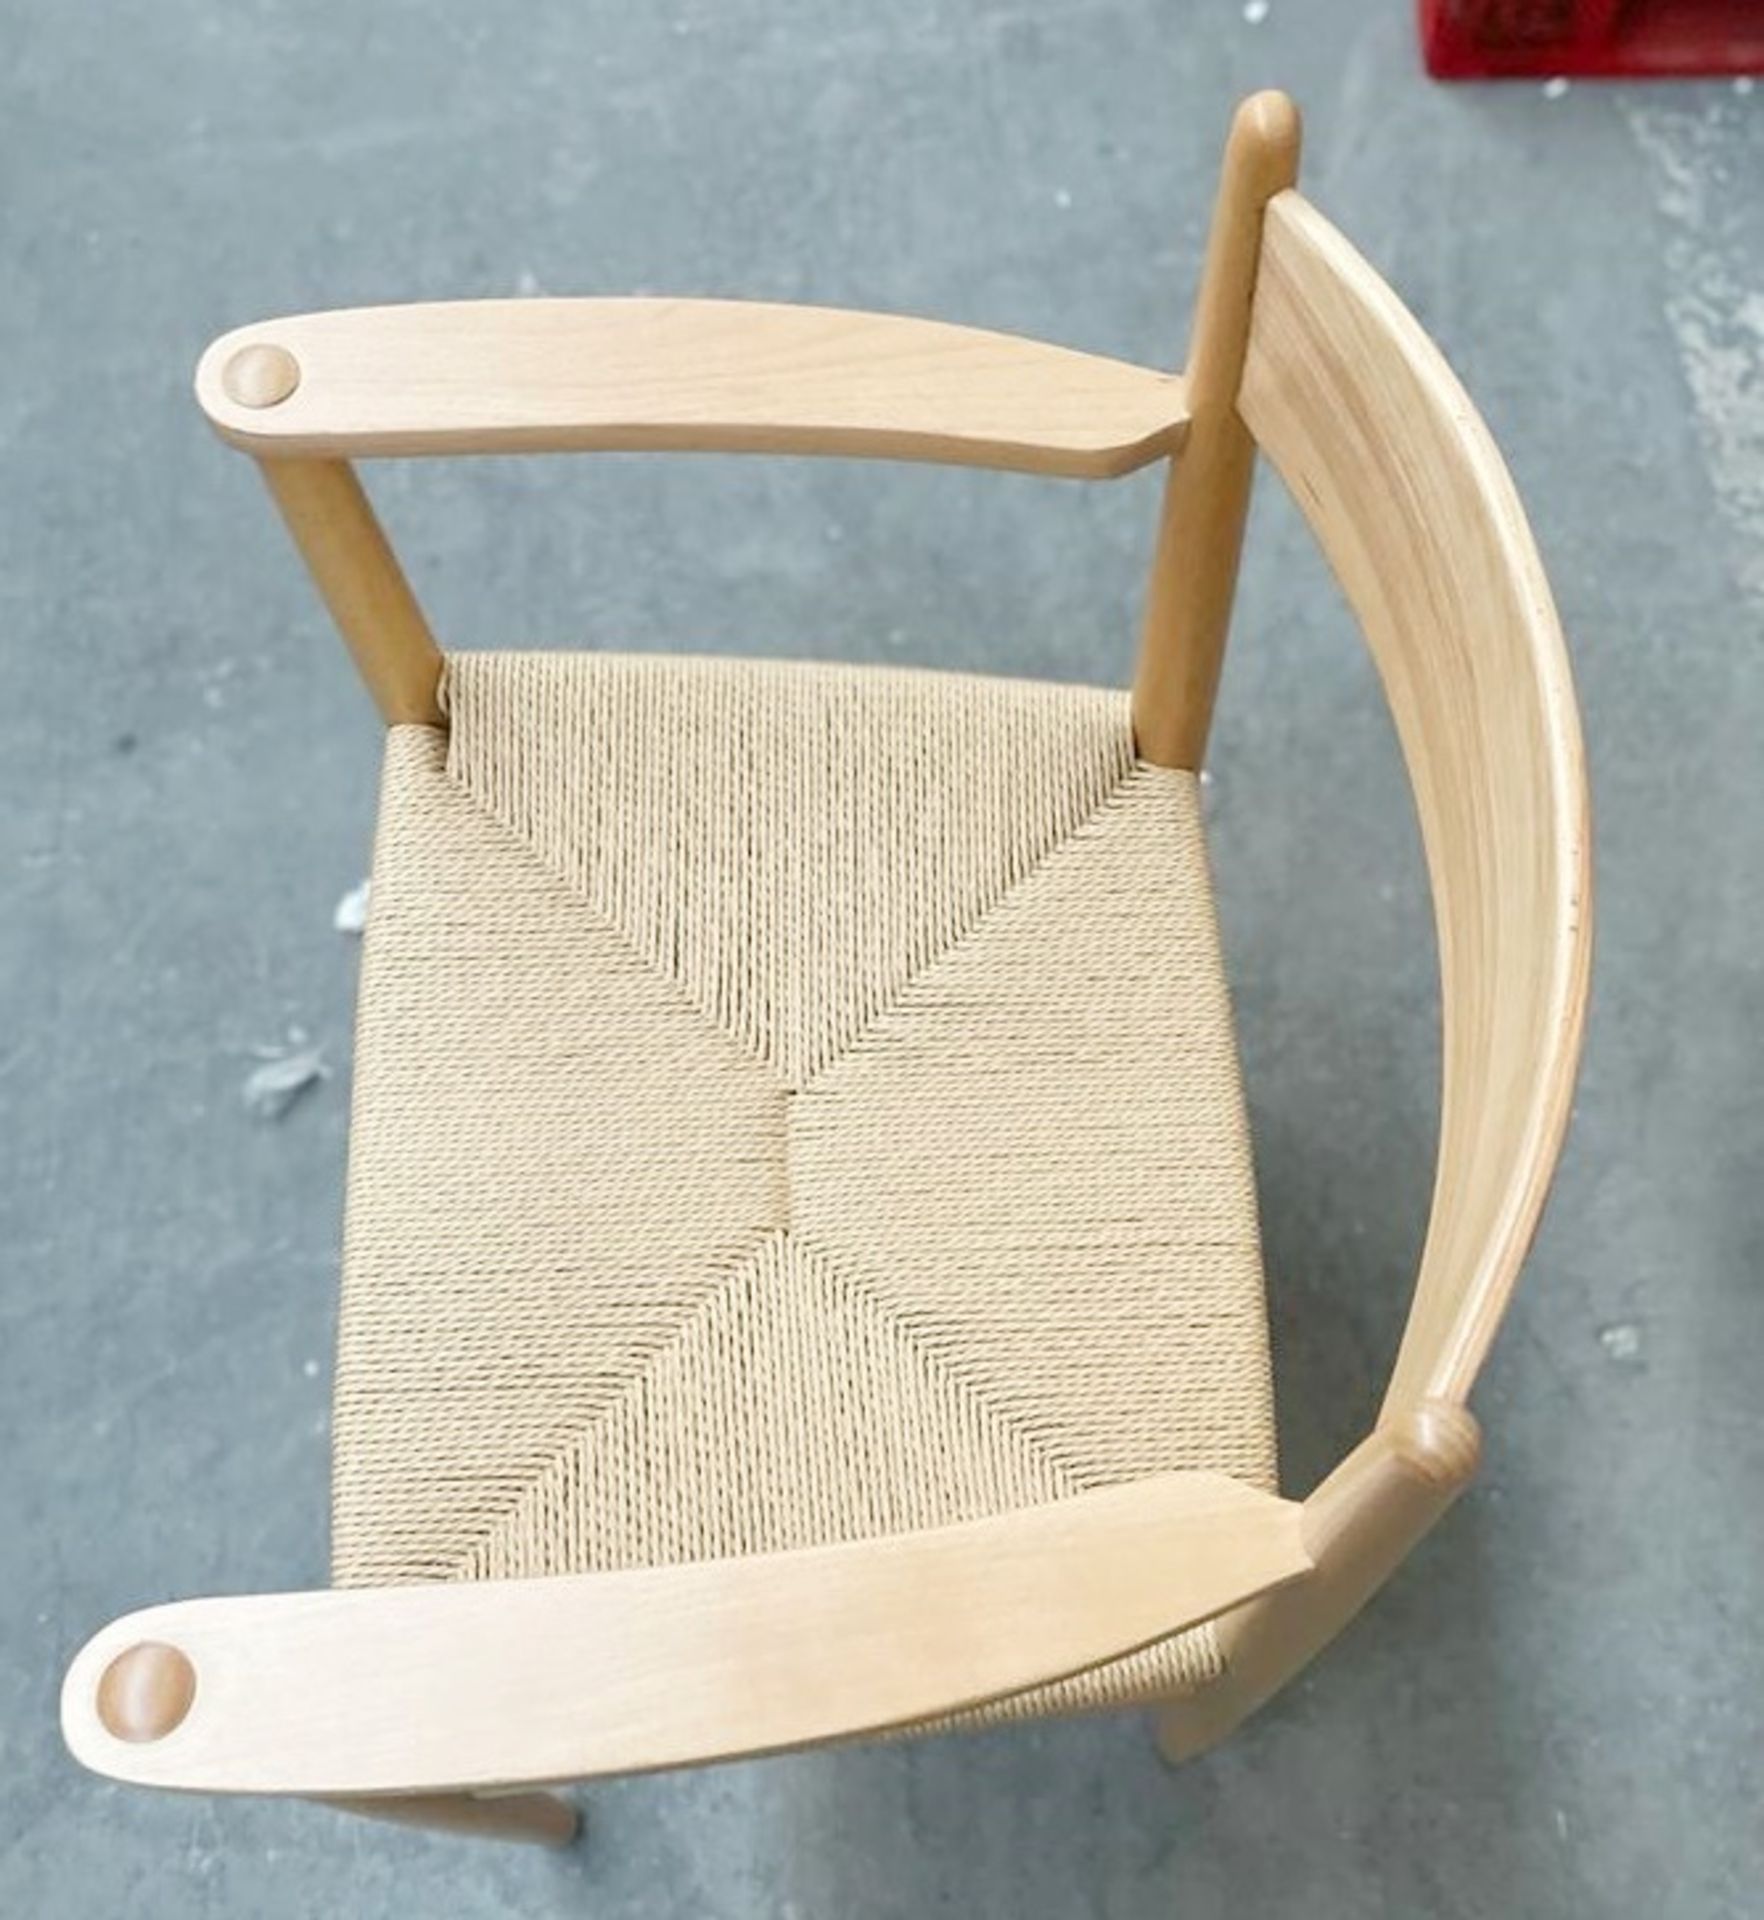 1 x Natural + Natural Cord Chair With Arm Rests - Dimensions: 50(h) x 48(d) x 58(w) cm - Brand New - Image 6 of 6